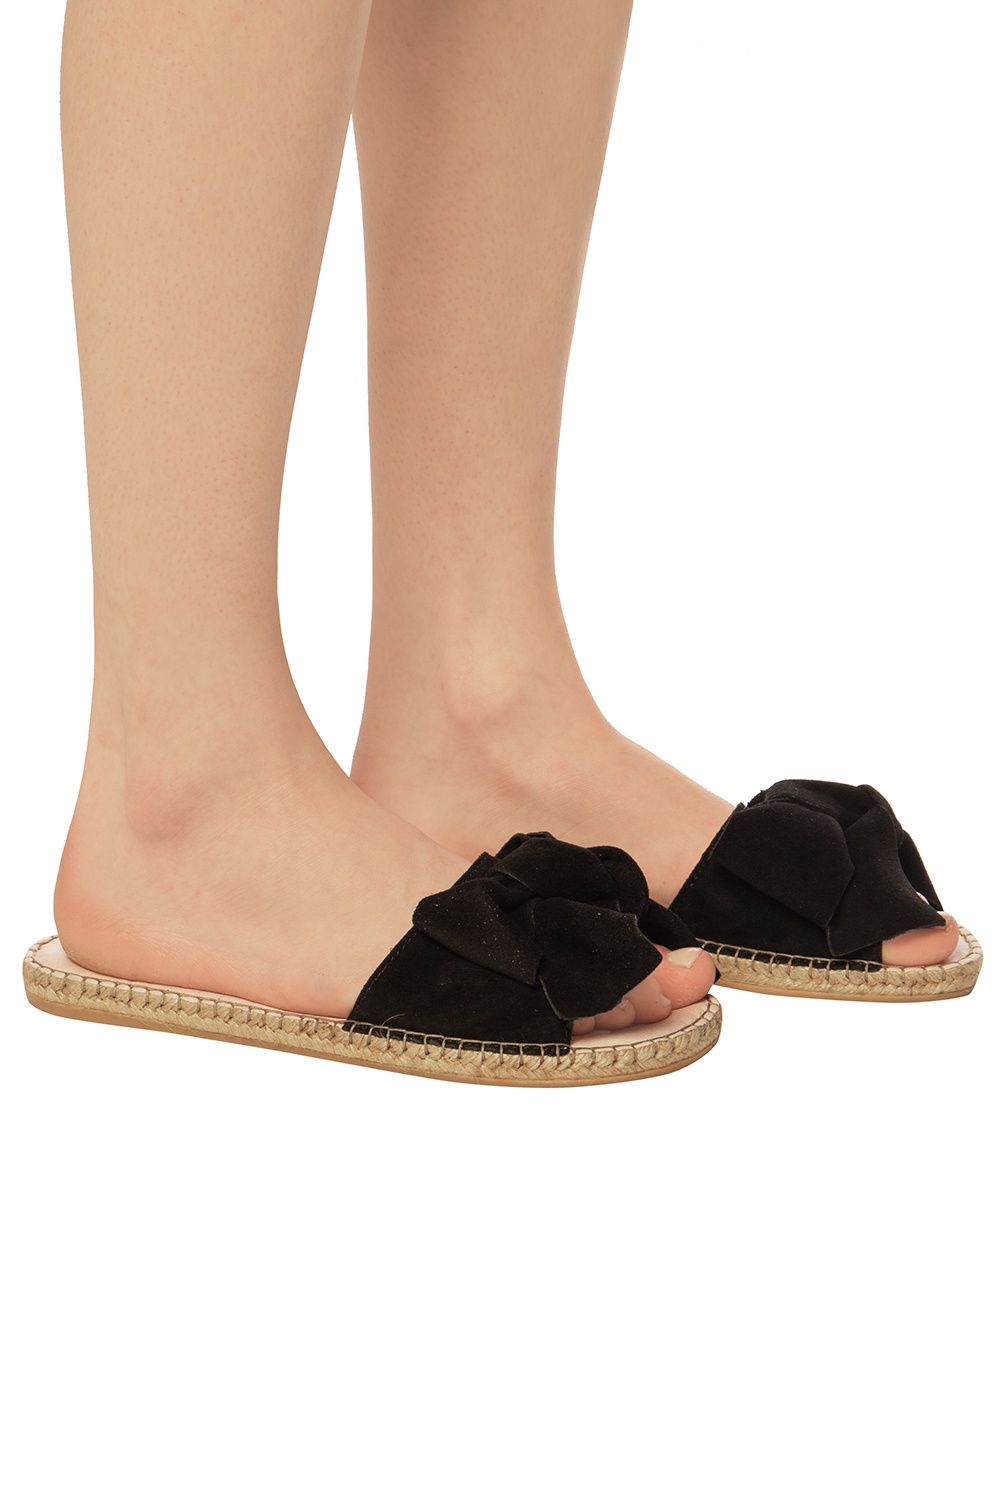 Manebí 'We also love a pair of sandals with a flatform sole for effortlessly upping the style stakes